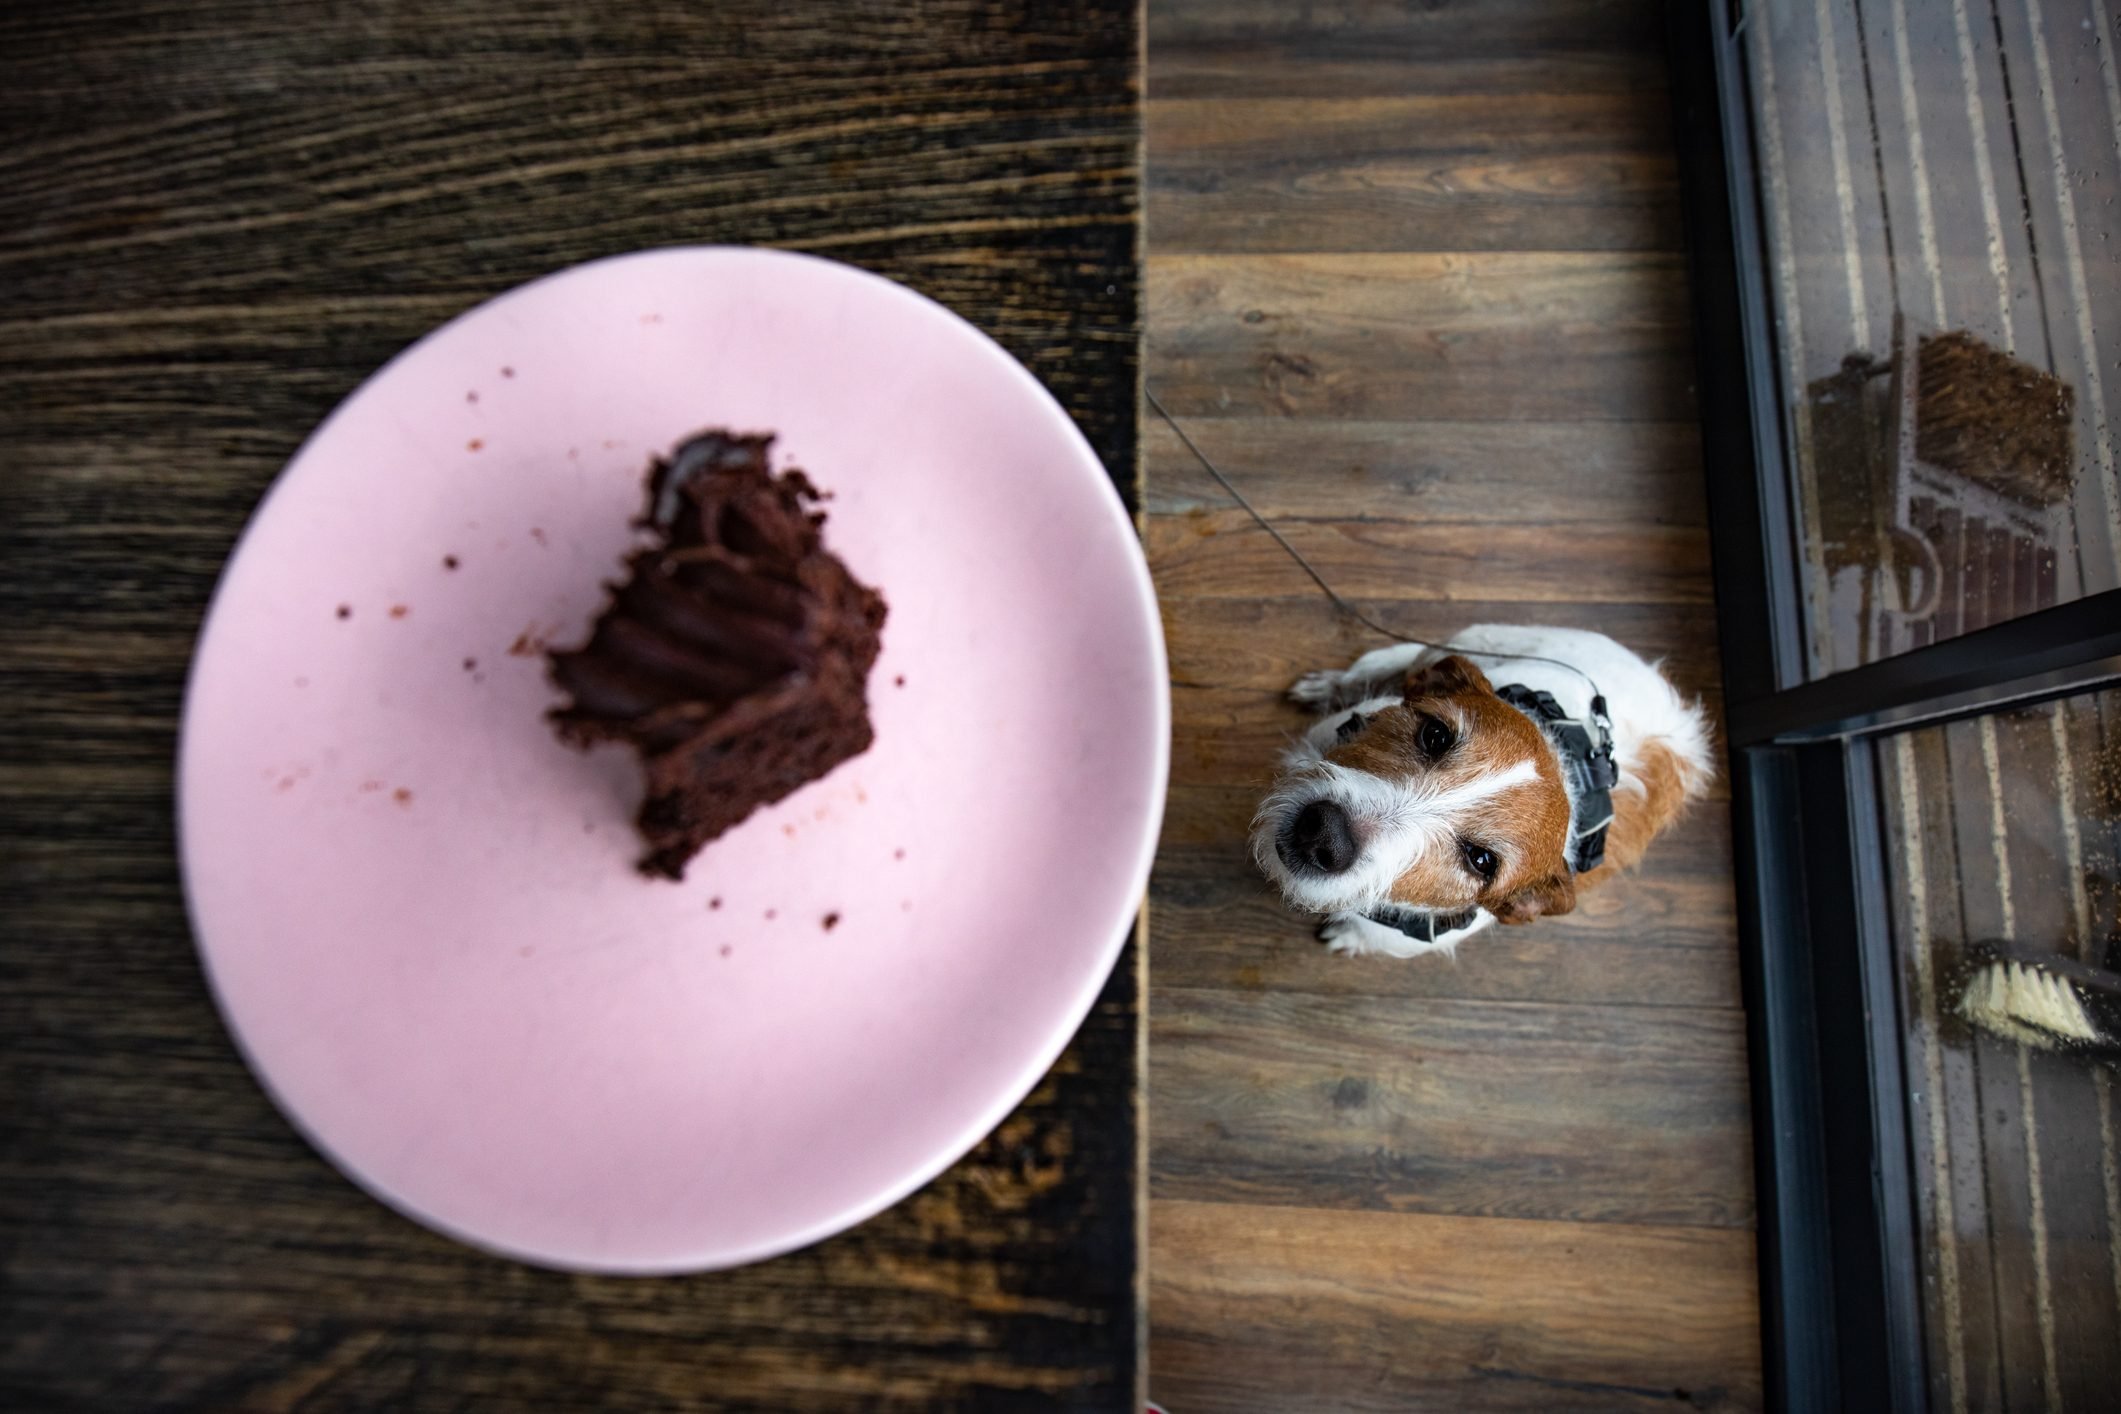 Dog in a cafe, and a piece of chocolate cake